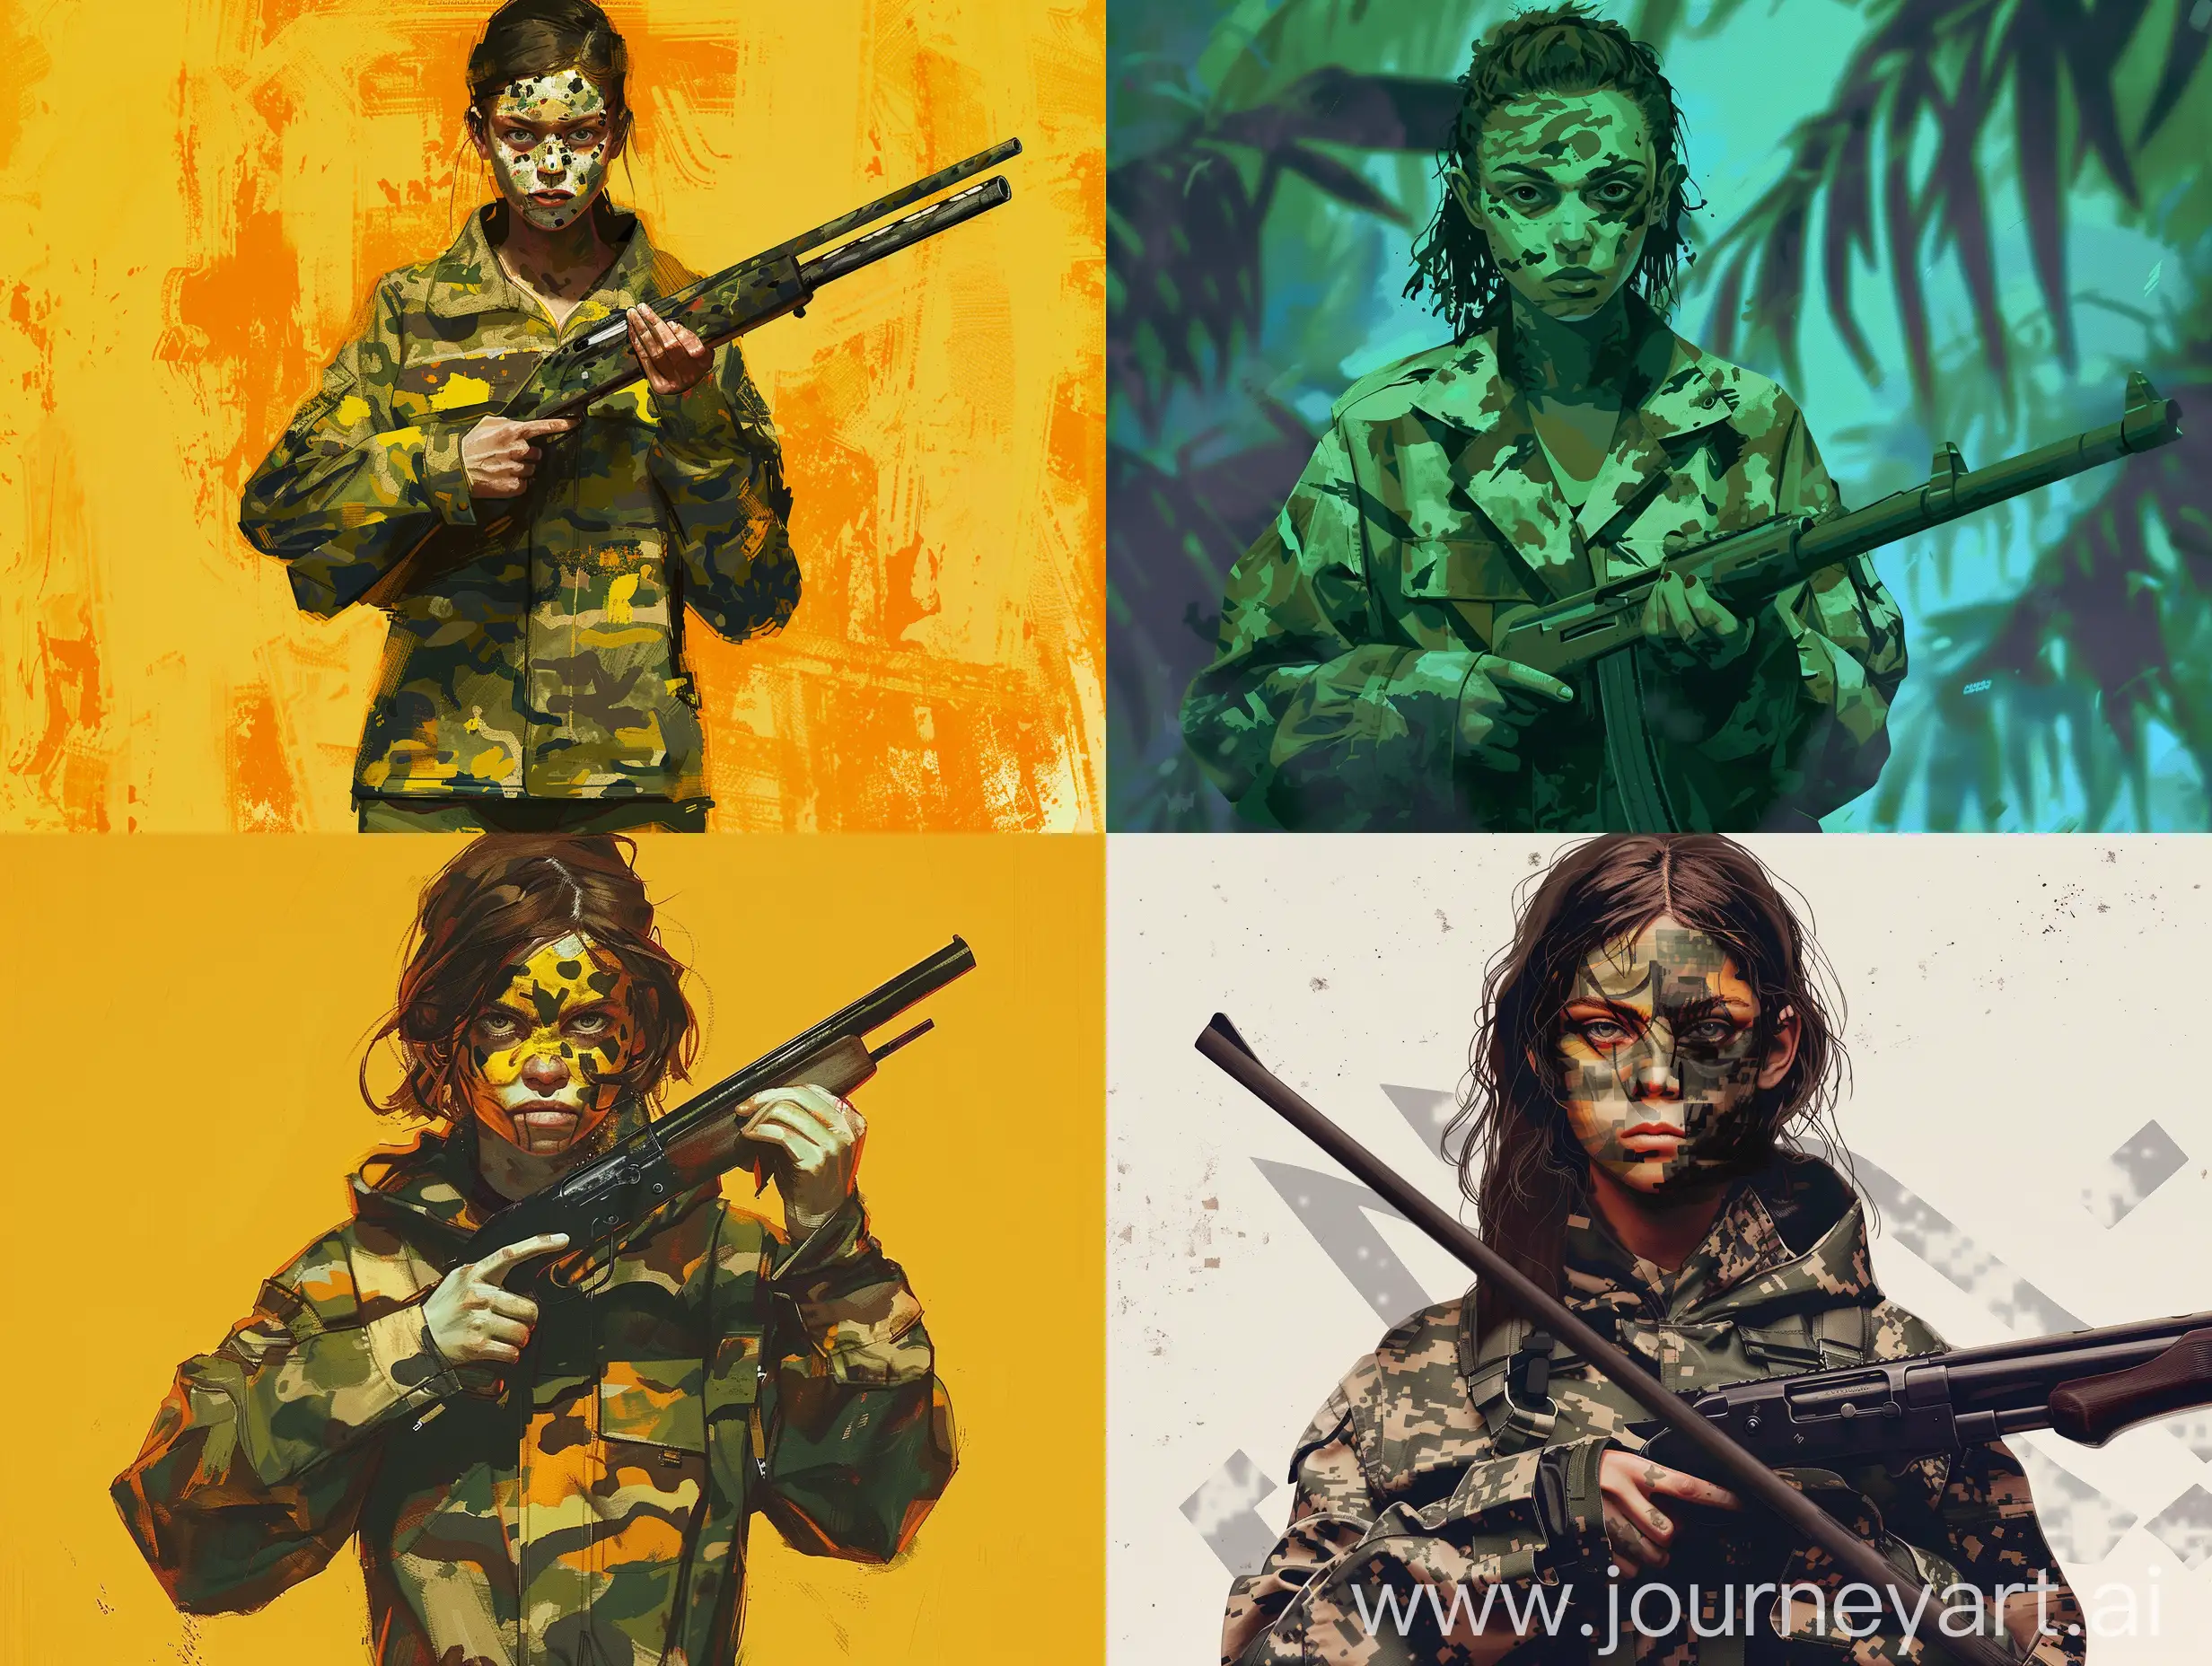 Stealthy-Woman-in-Camouflage-Suit-with-Shotgun-Hotline-Miami-Style-Art